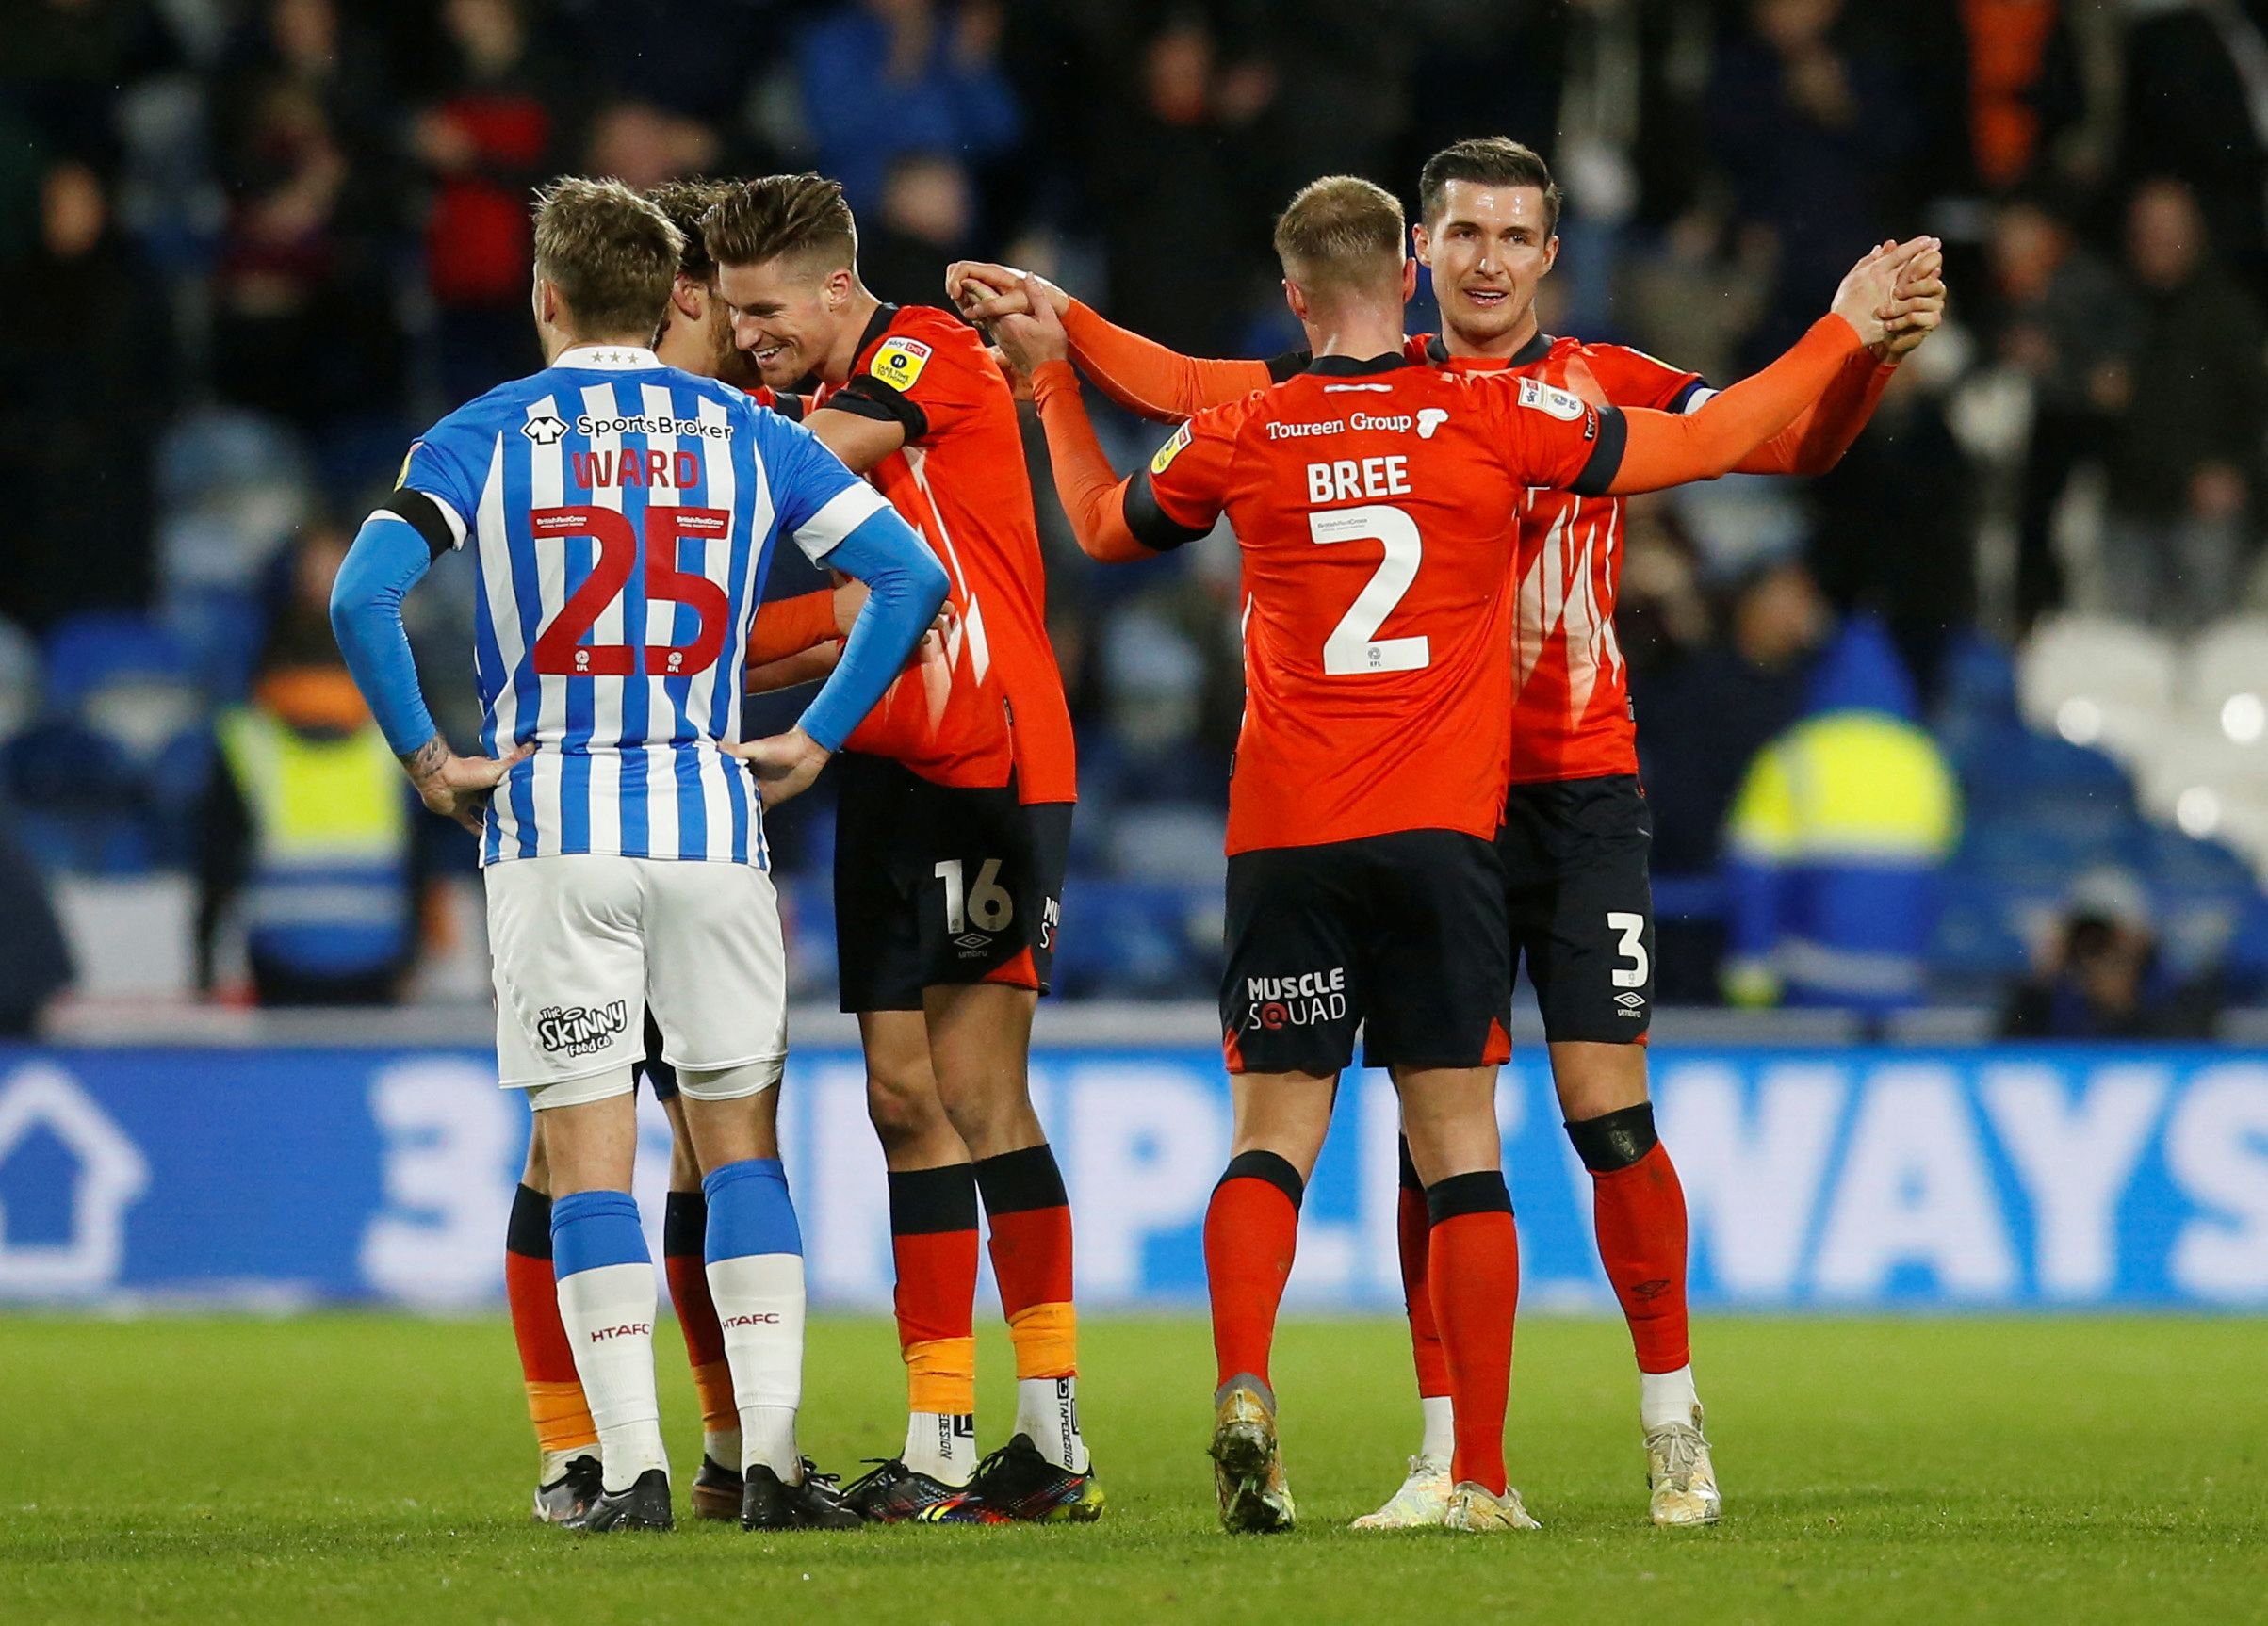 Soccer Football - Championship -  Huddersfield Town v Luton Town - John Smith's Stadium, Huddersfield, Britain - January 1, 2023 Luton Town's Dan Potts and James Bree celebrate after the match   Action Images/Ed Sykes  EDITORIAL USE ONLY. No use with unauthorized audio, video, data, fixture lists, club/league logos or 